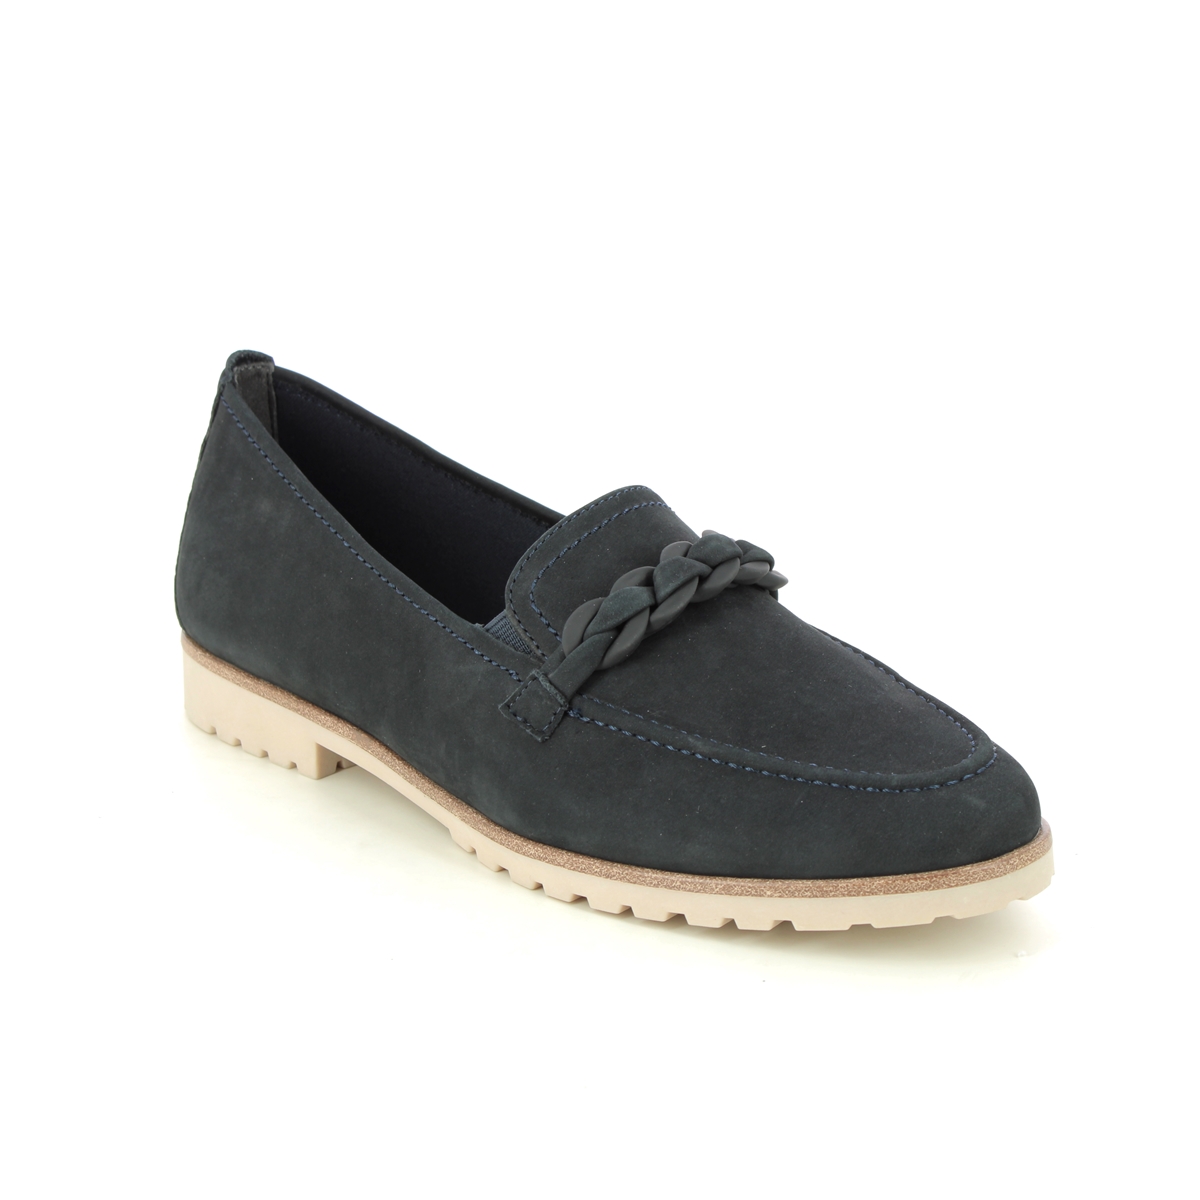 Tamaris Careen Loafer Navy Nubuck Womens Loafers 24200-20-805 In Size 36 In Plain Navy Nubuck